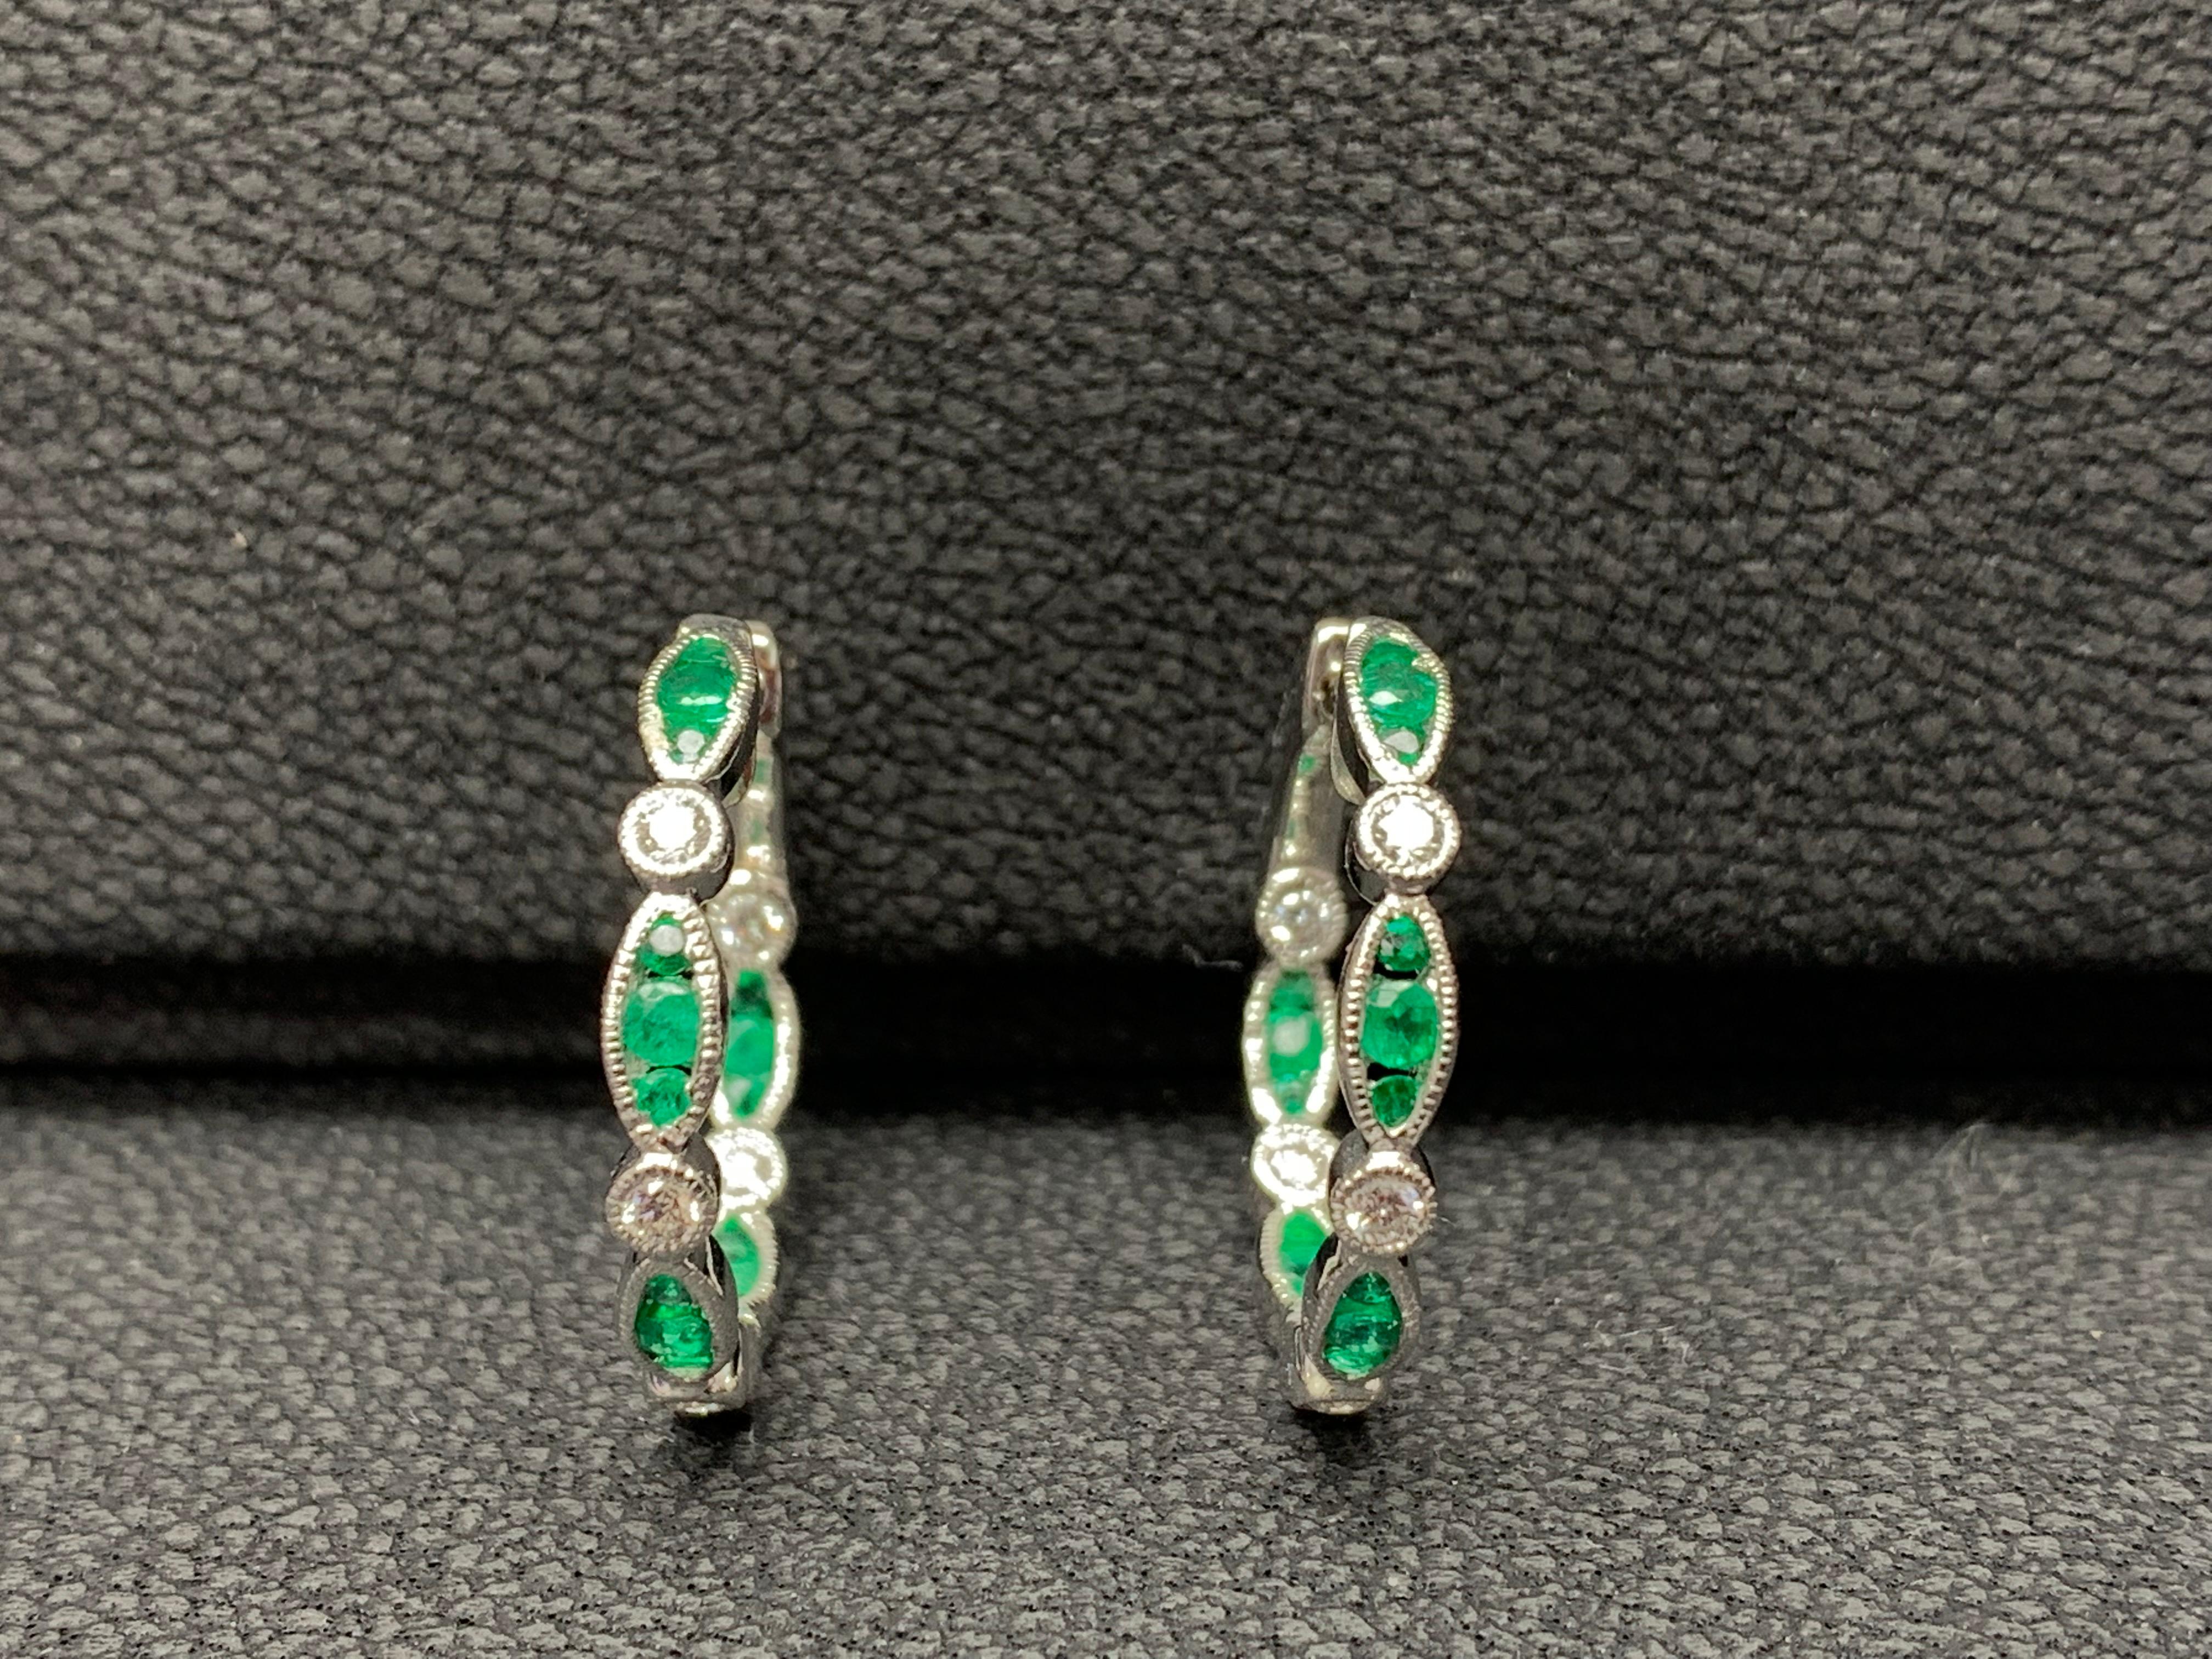 A unique piece of hoop earrings showcasing a row of  30 round Emeralds and 10 diamonds, set in a bezel made in 18k white gold. Rubies weigh 0.68 carats and Diamonds weigh 0.28 carats total.
Style available in different price ranges. Prices are based